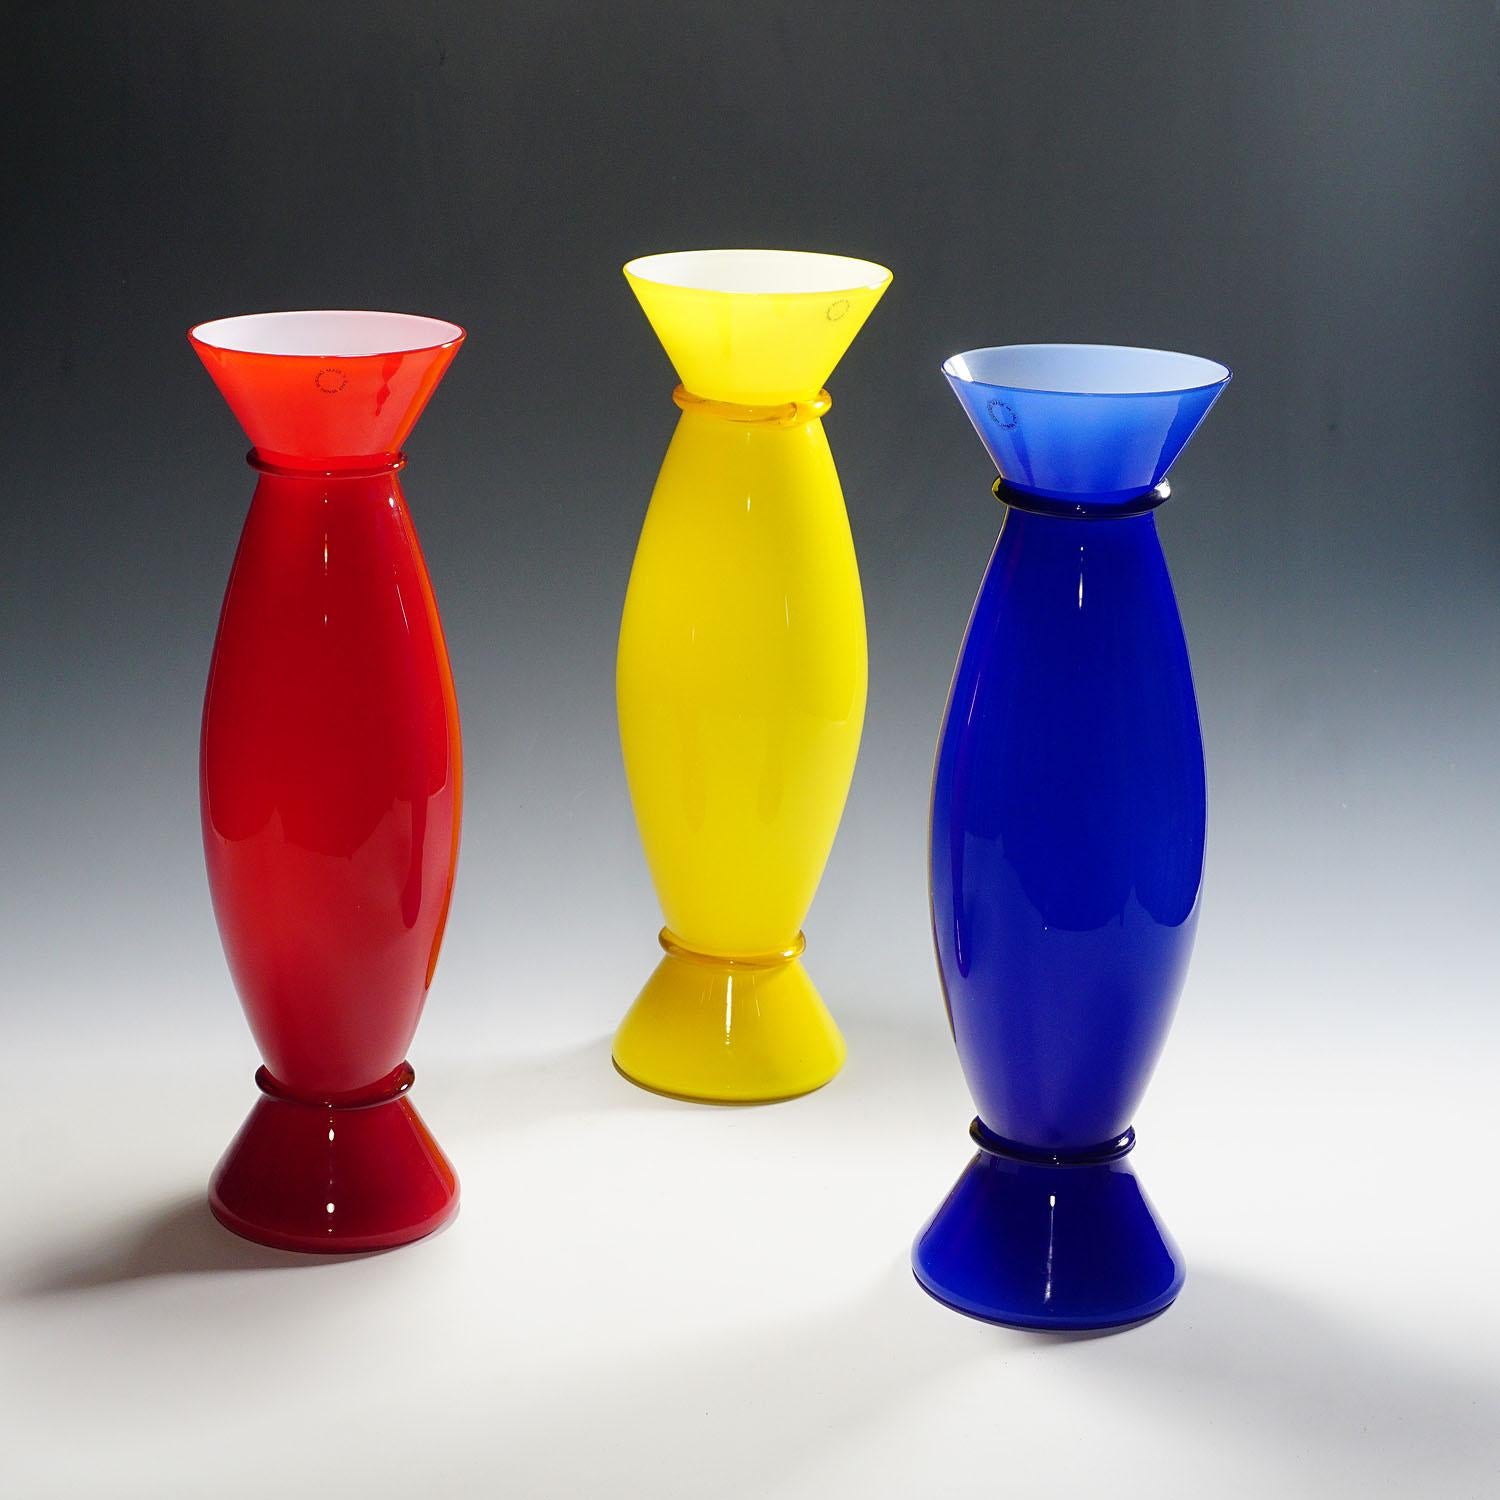 A set of three Acco Vases designed in 1988 by Alessandro Mendini for Venini, Venice. White opaque glass with colorful overlays in red, yellow and blue and a clear glass finish. All three with incised signature 'venini 88, 89 and 90' on the base and